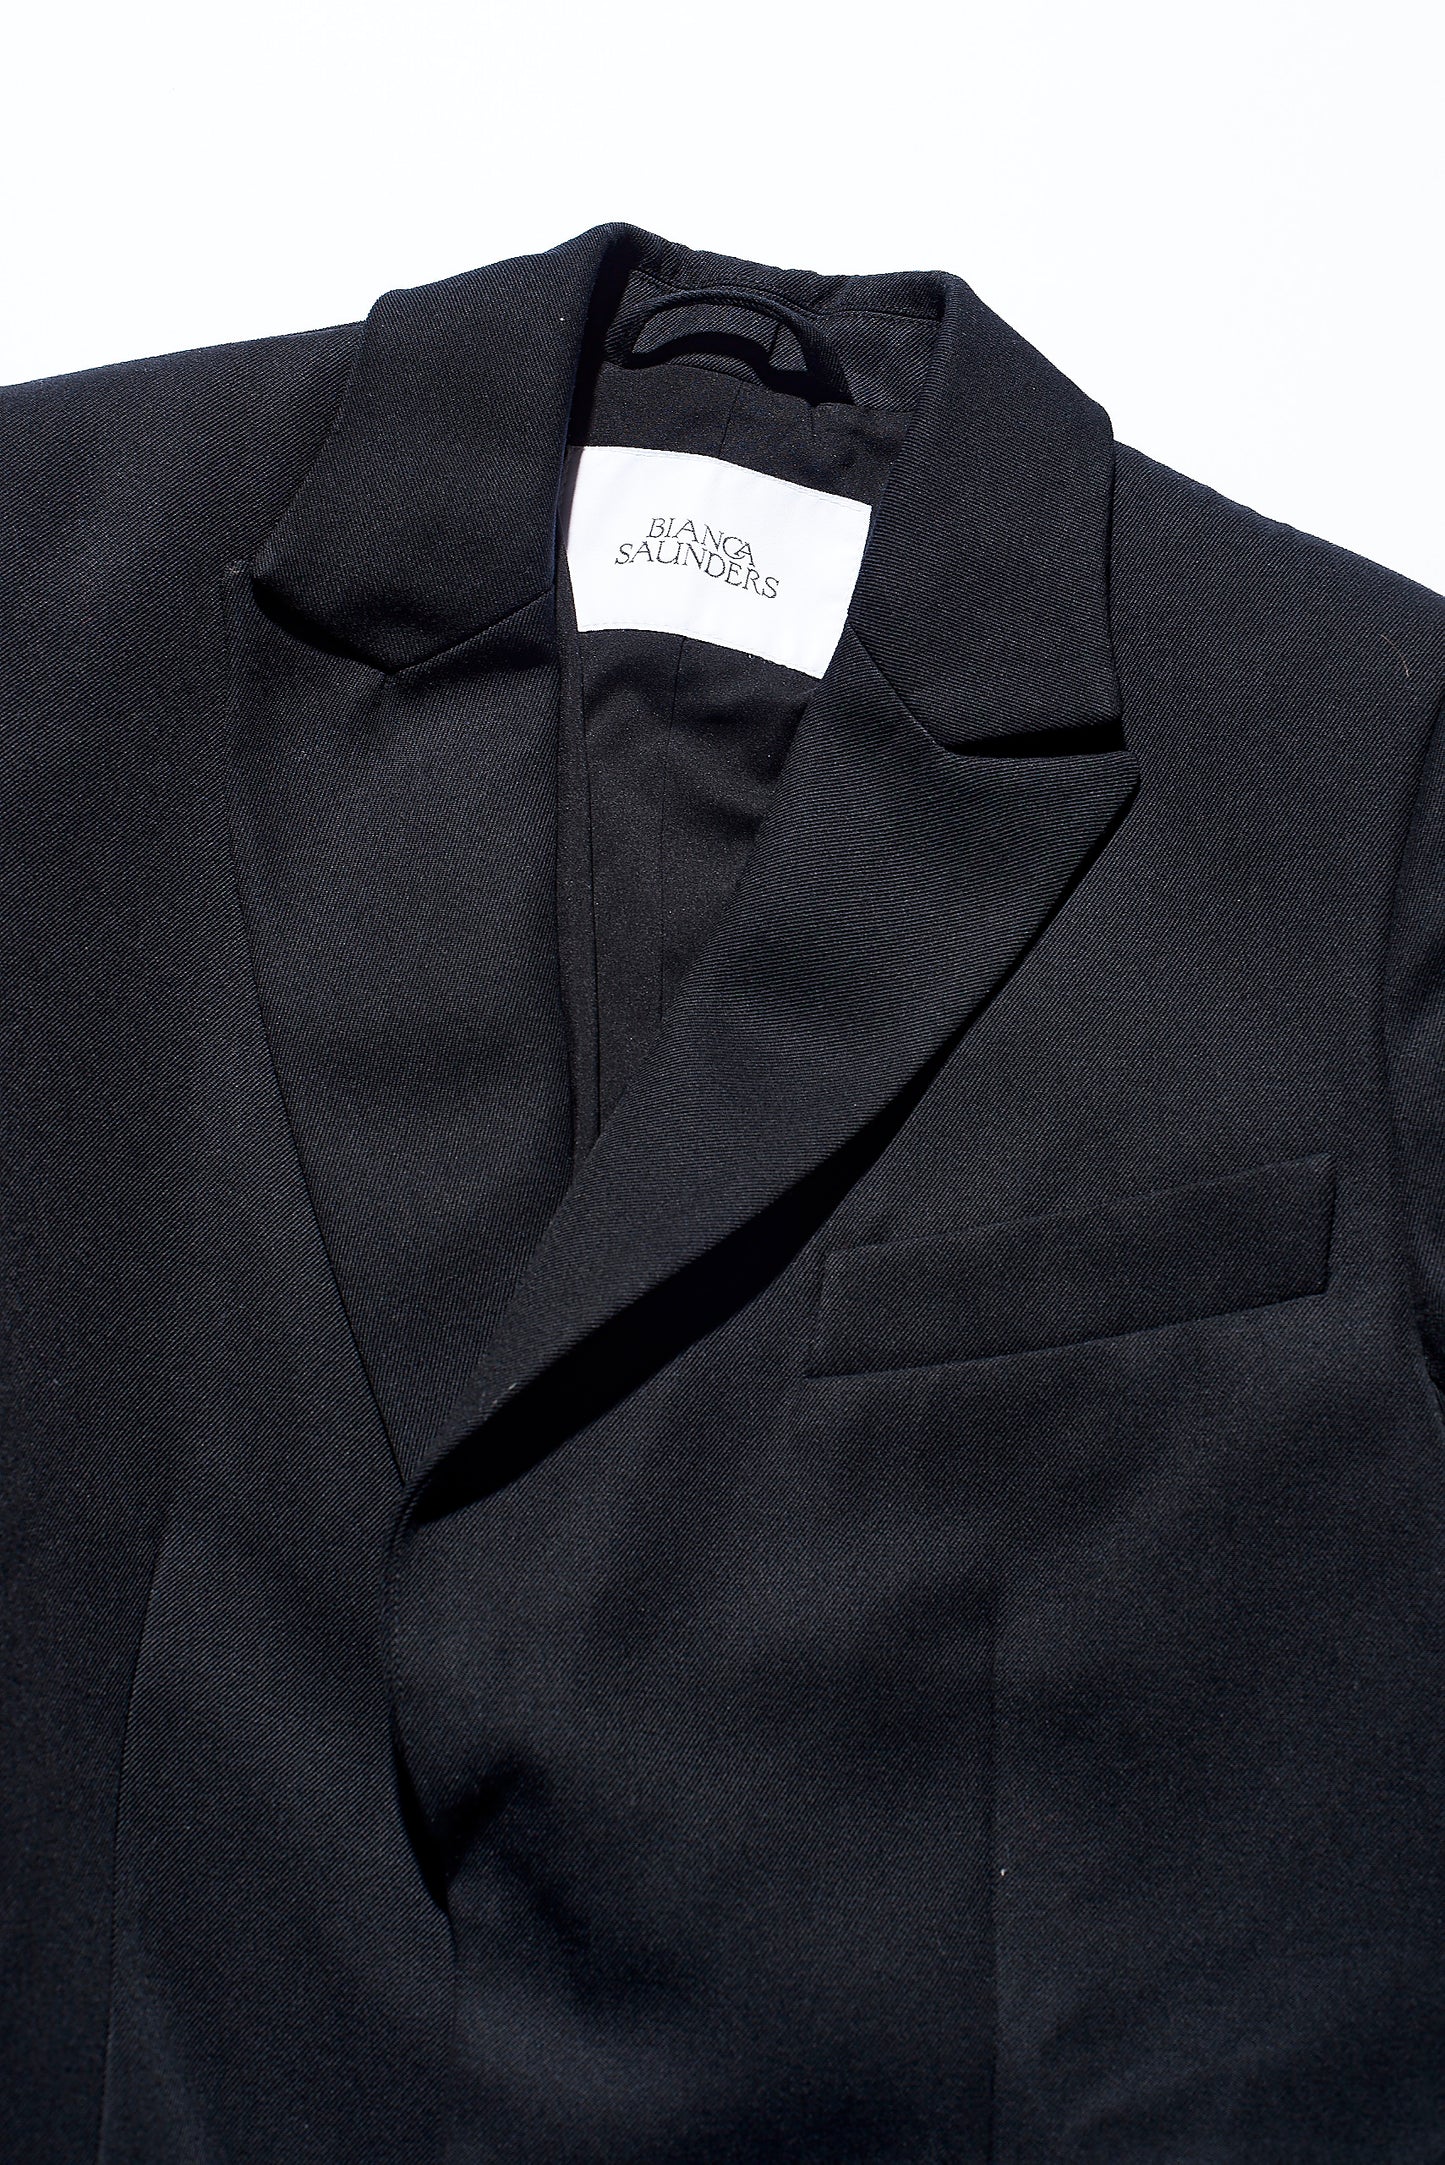 Black Cone Suit Jacket AW22